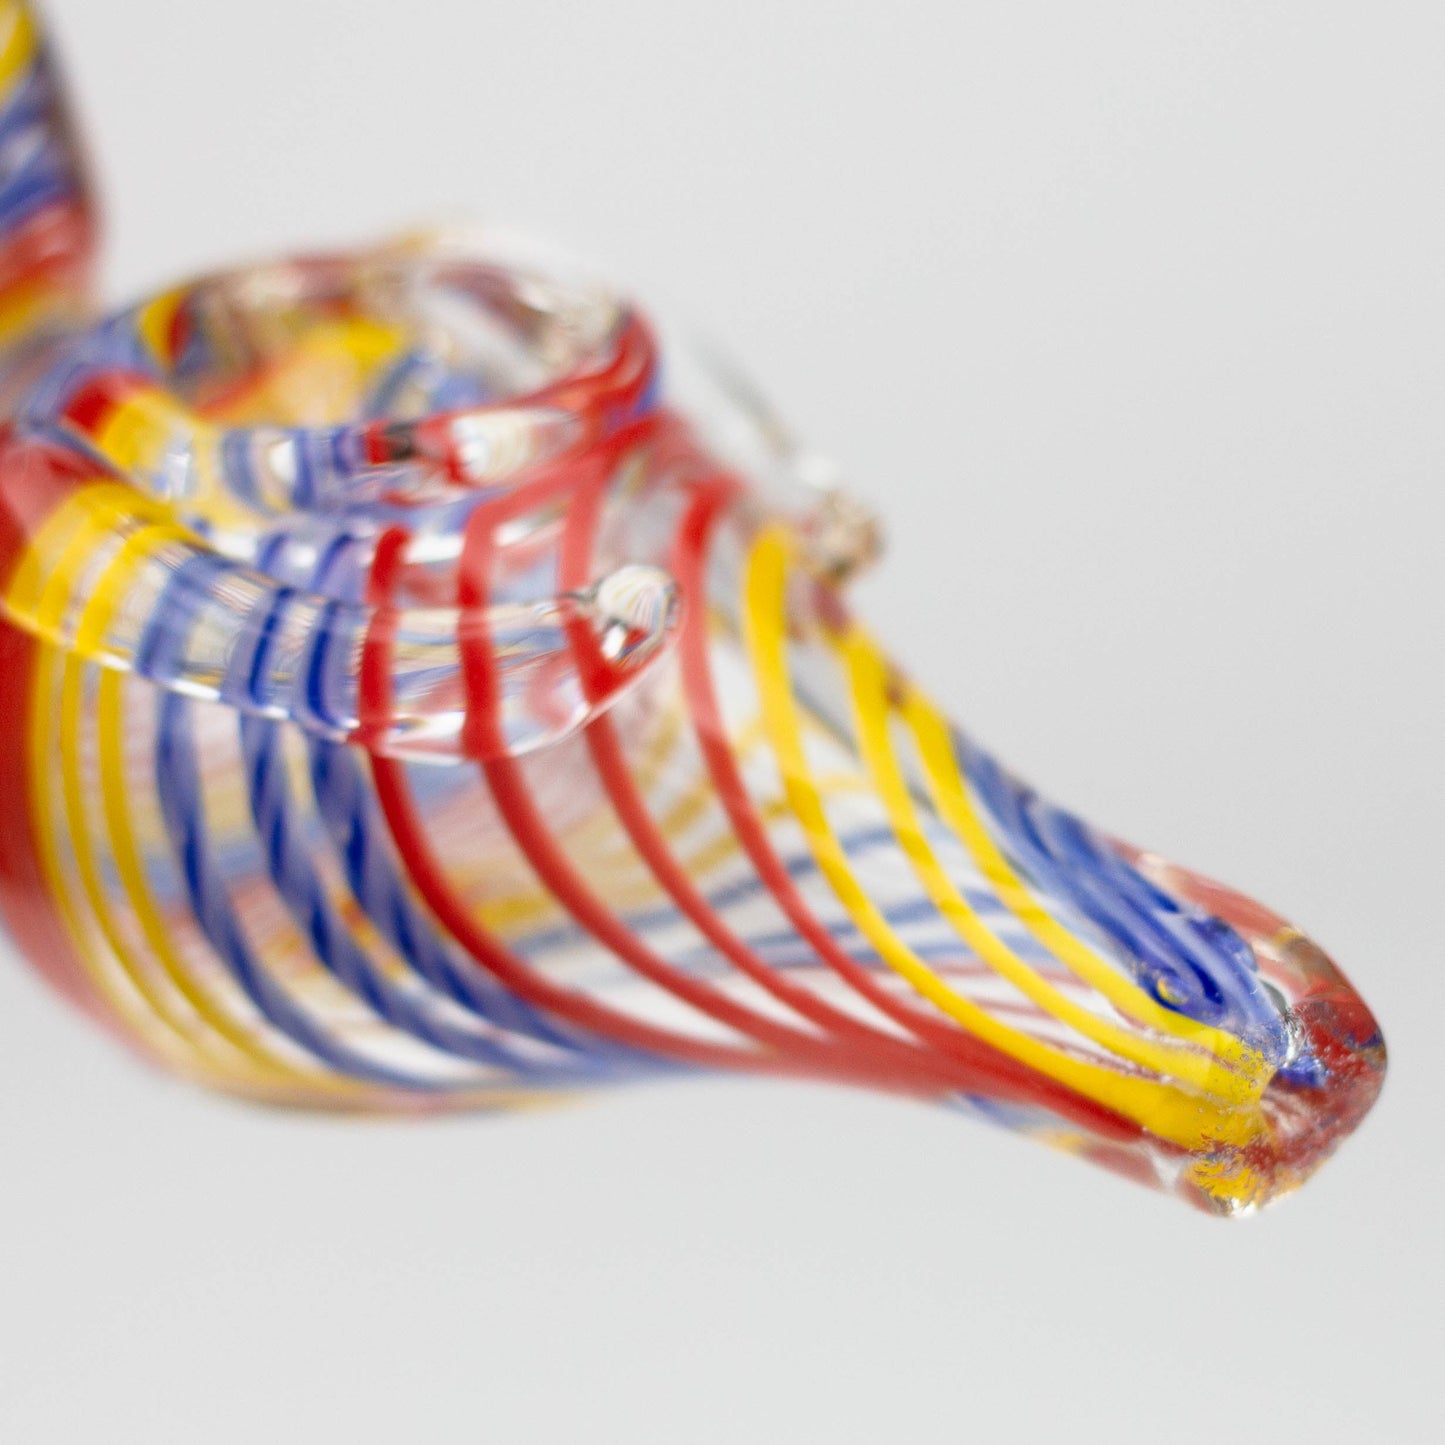 5" Duck glass hand pipe_3